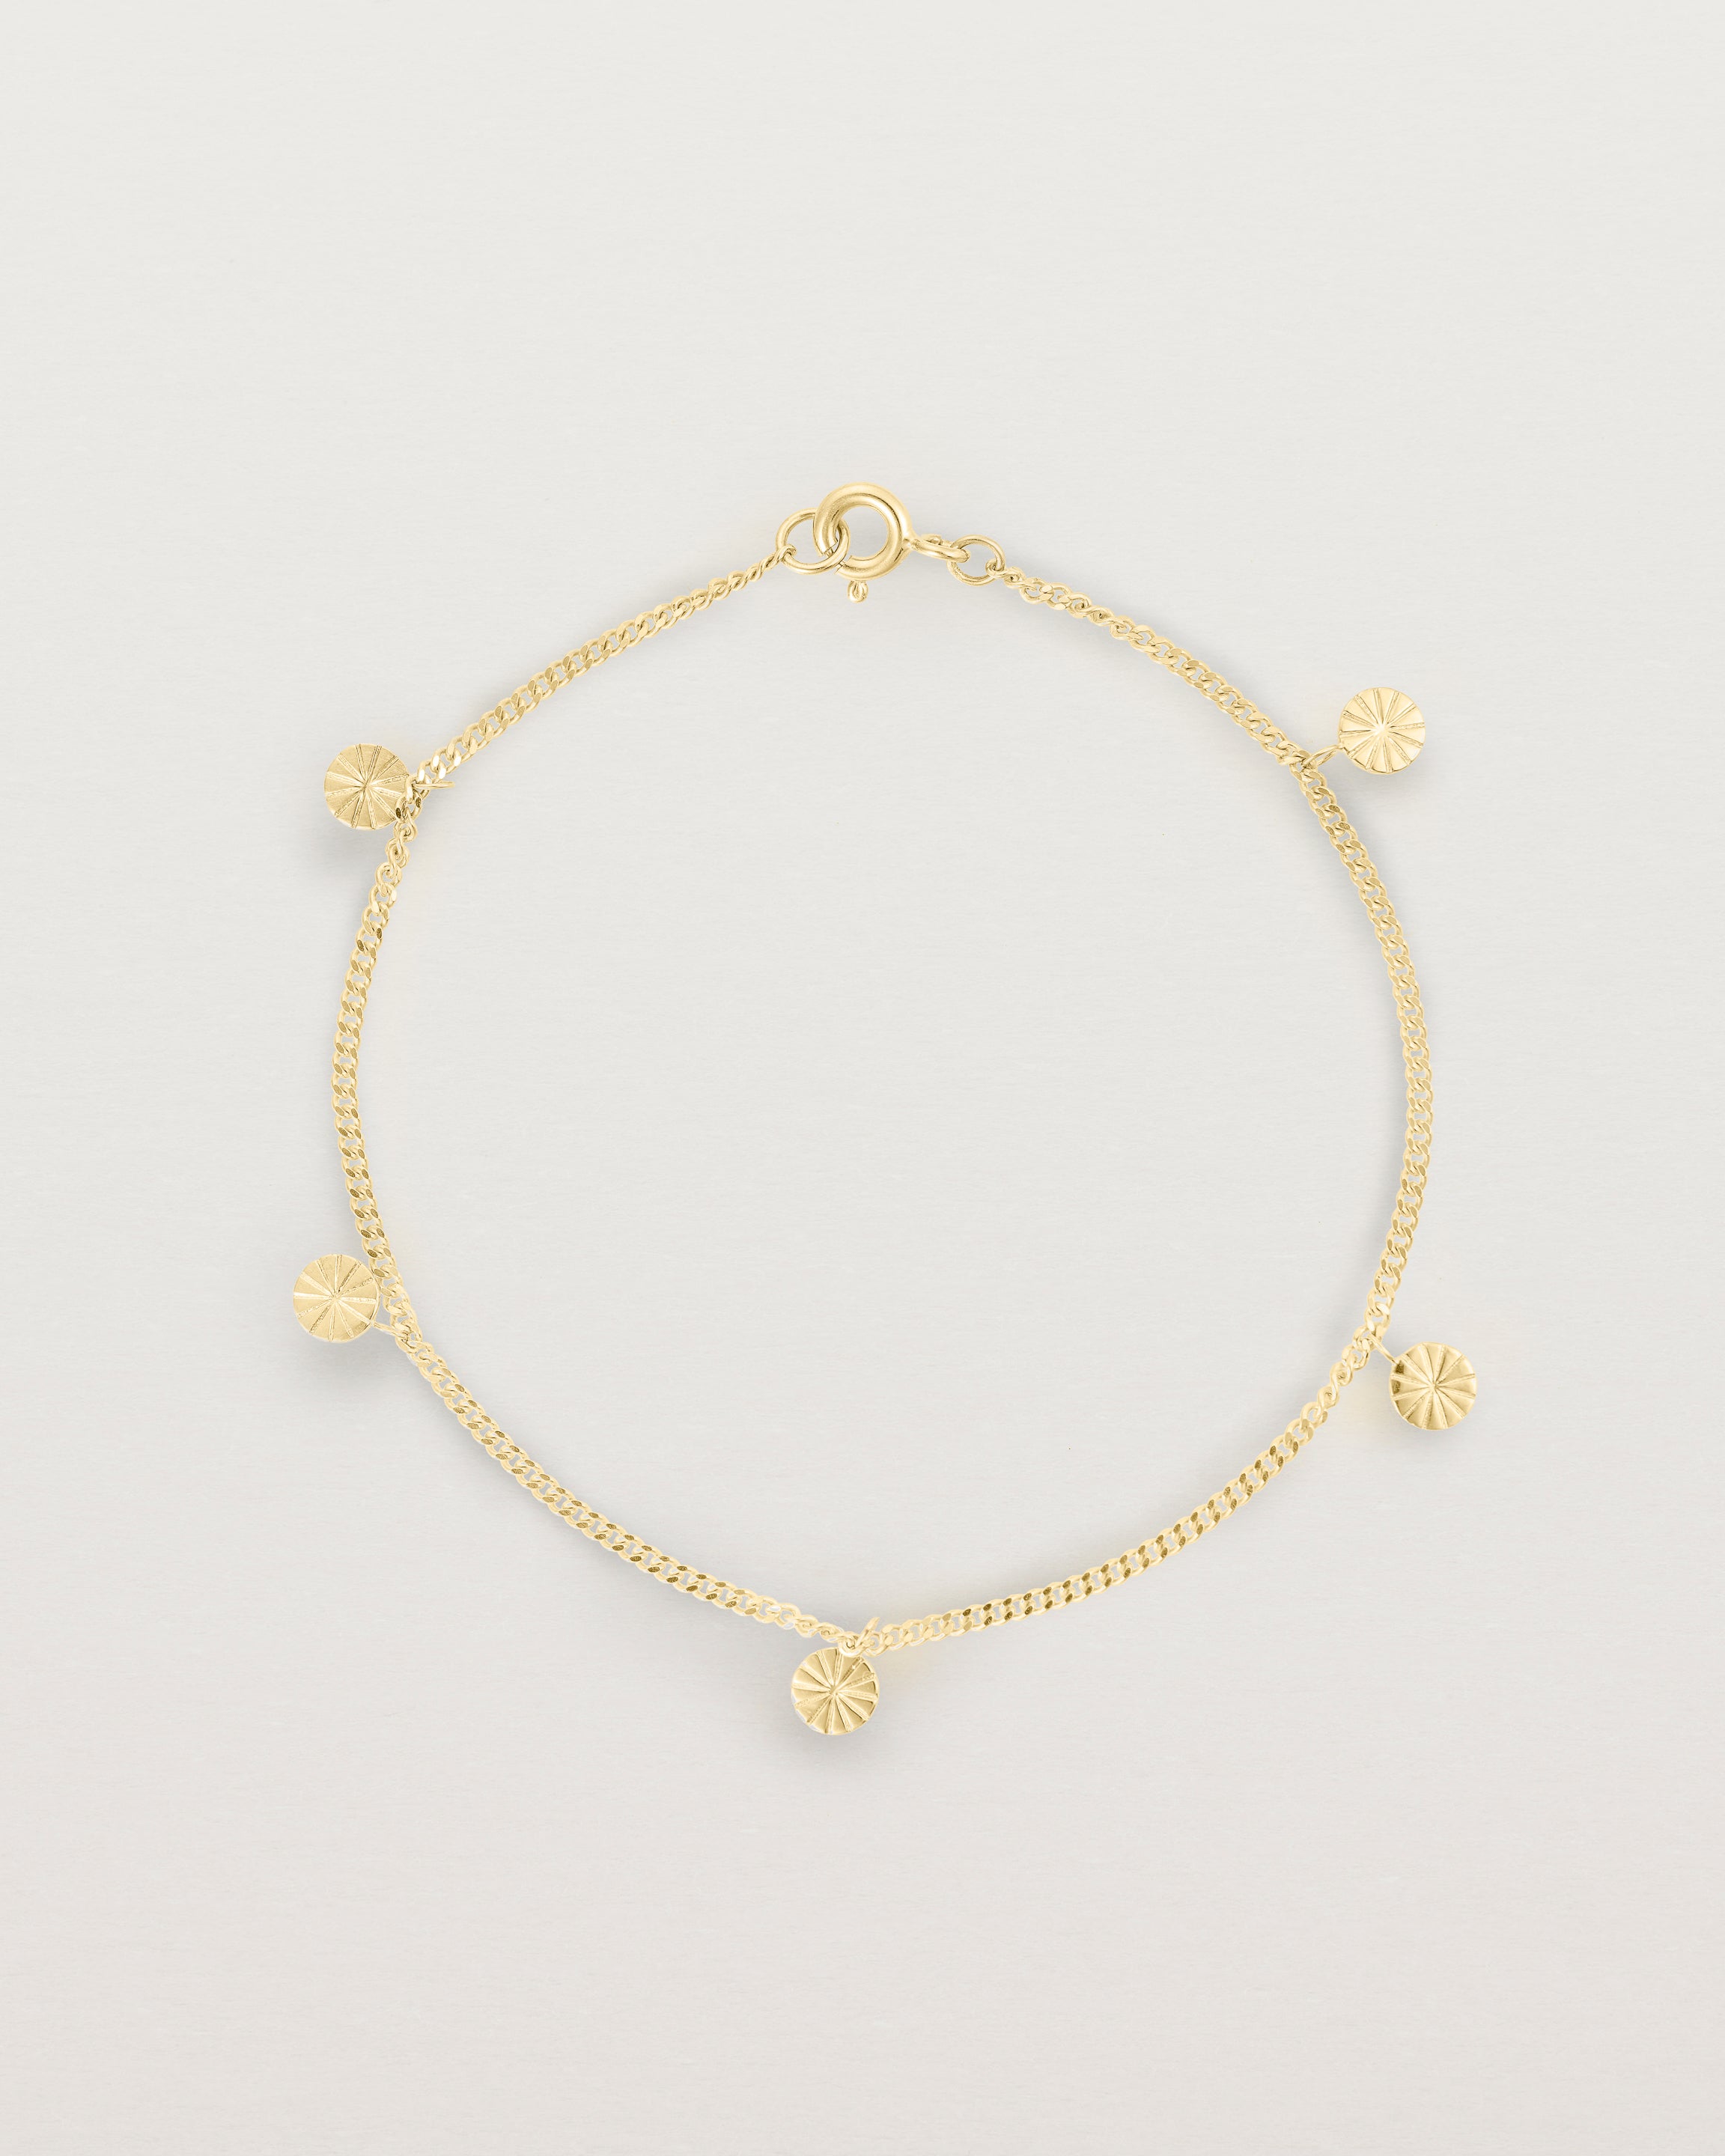 A yellow gold chain bracelet with five circle charms